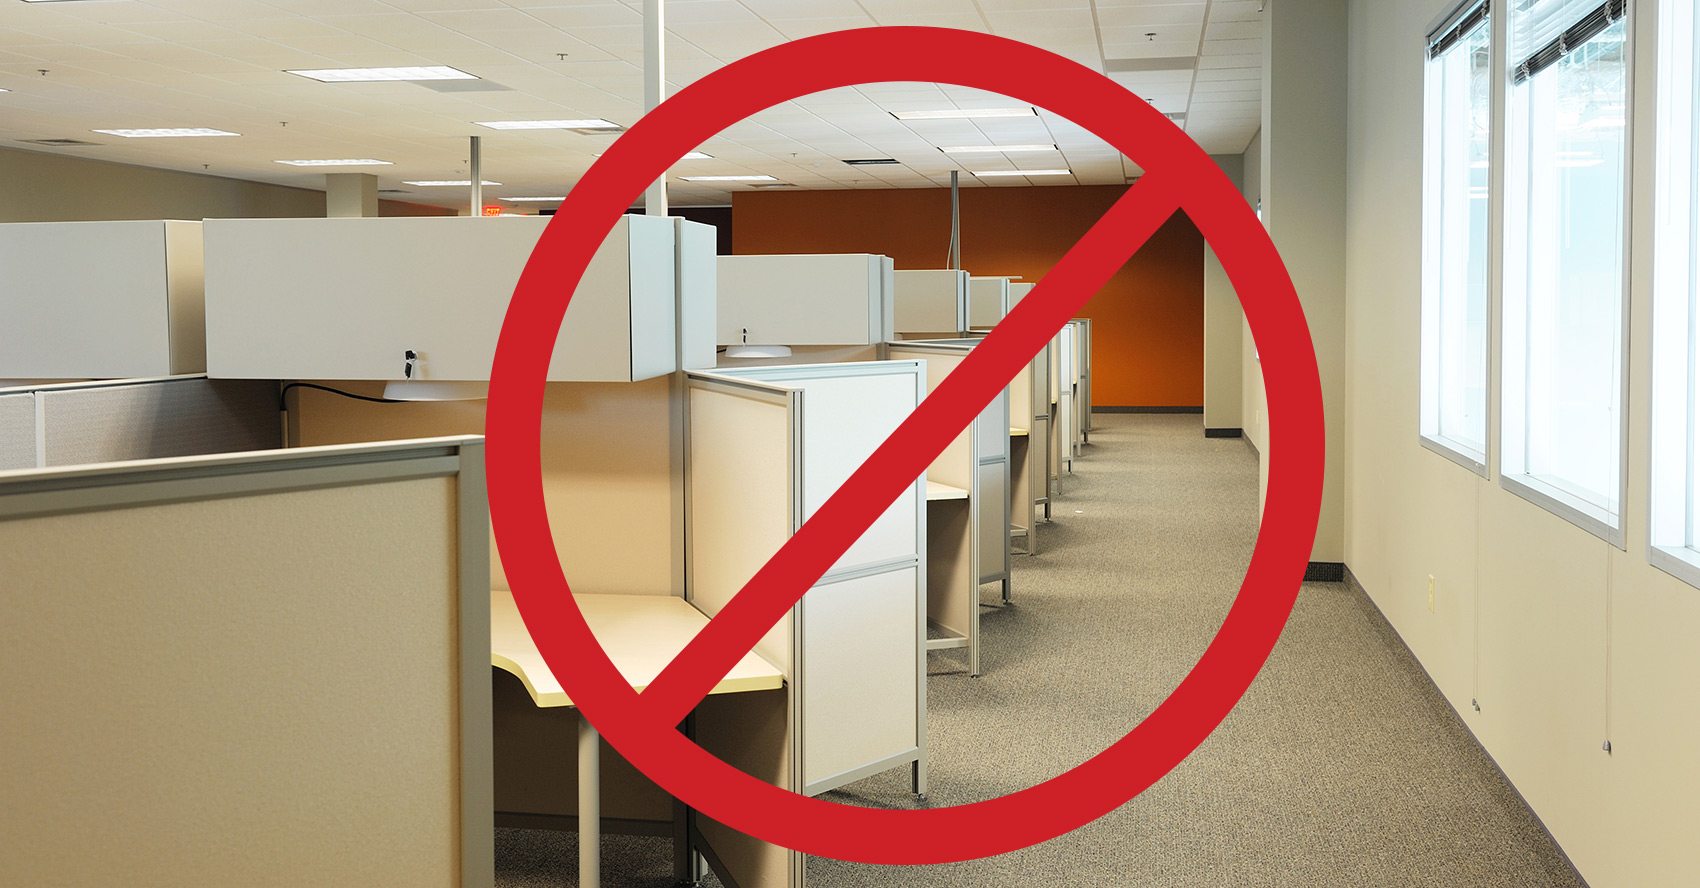 Office Decorating Tips - Remove the Cubicle